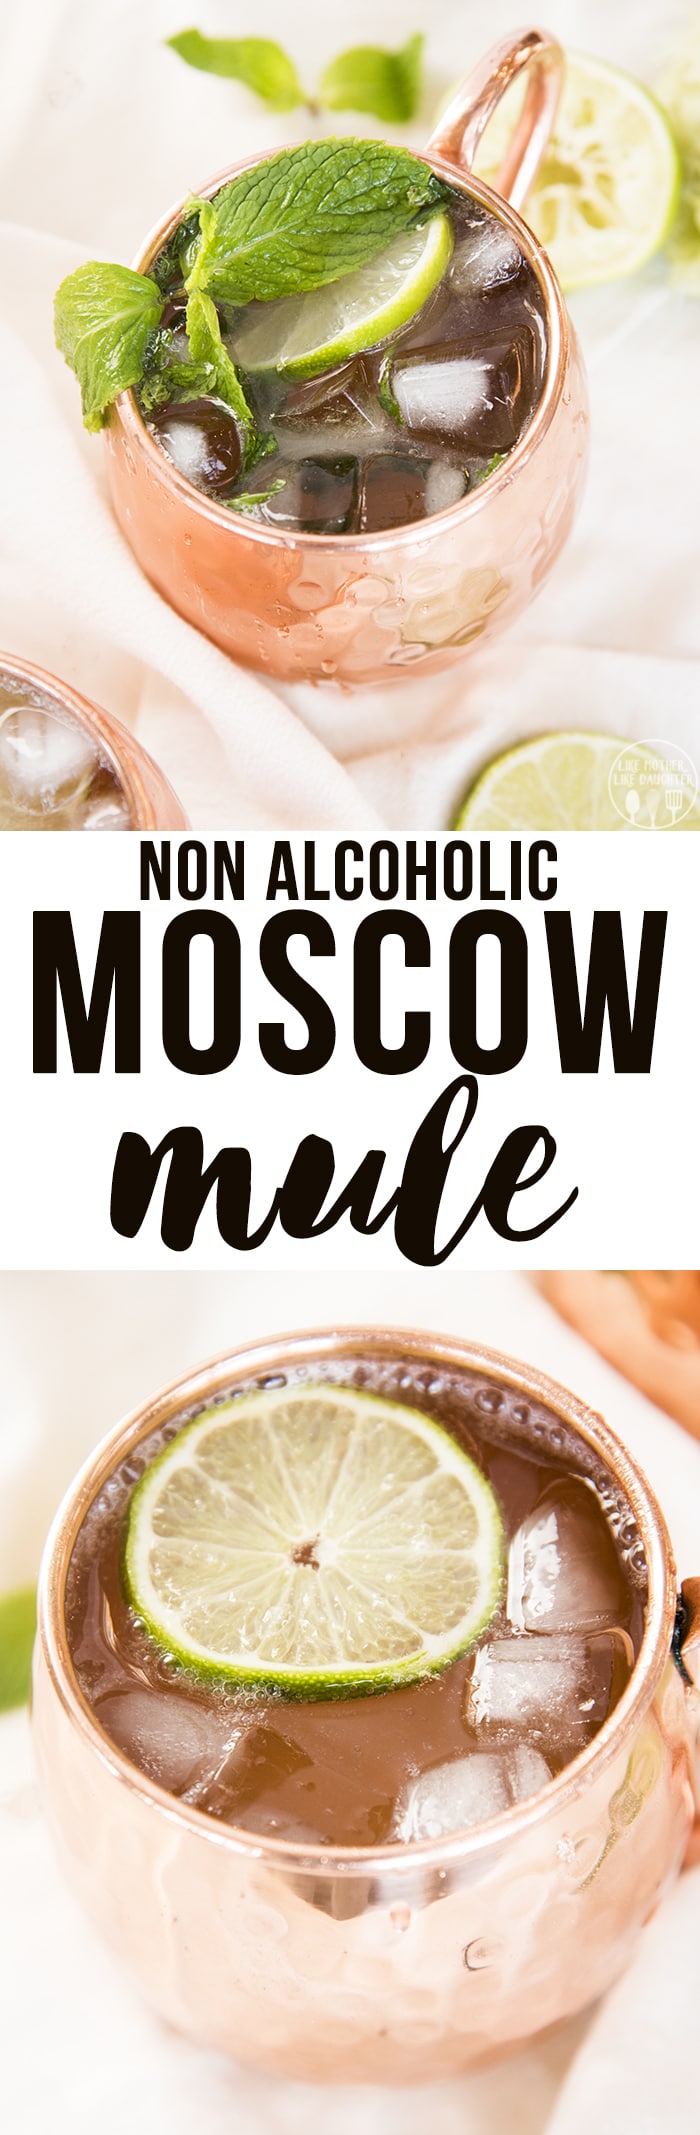 Non Alcoholic Moscow Mule is the perfect spicy and refreshing mocktail, perfect for a hot summer night or a winter holiday party!